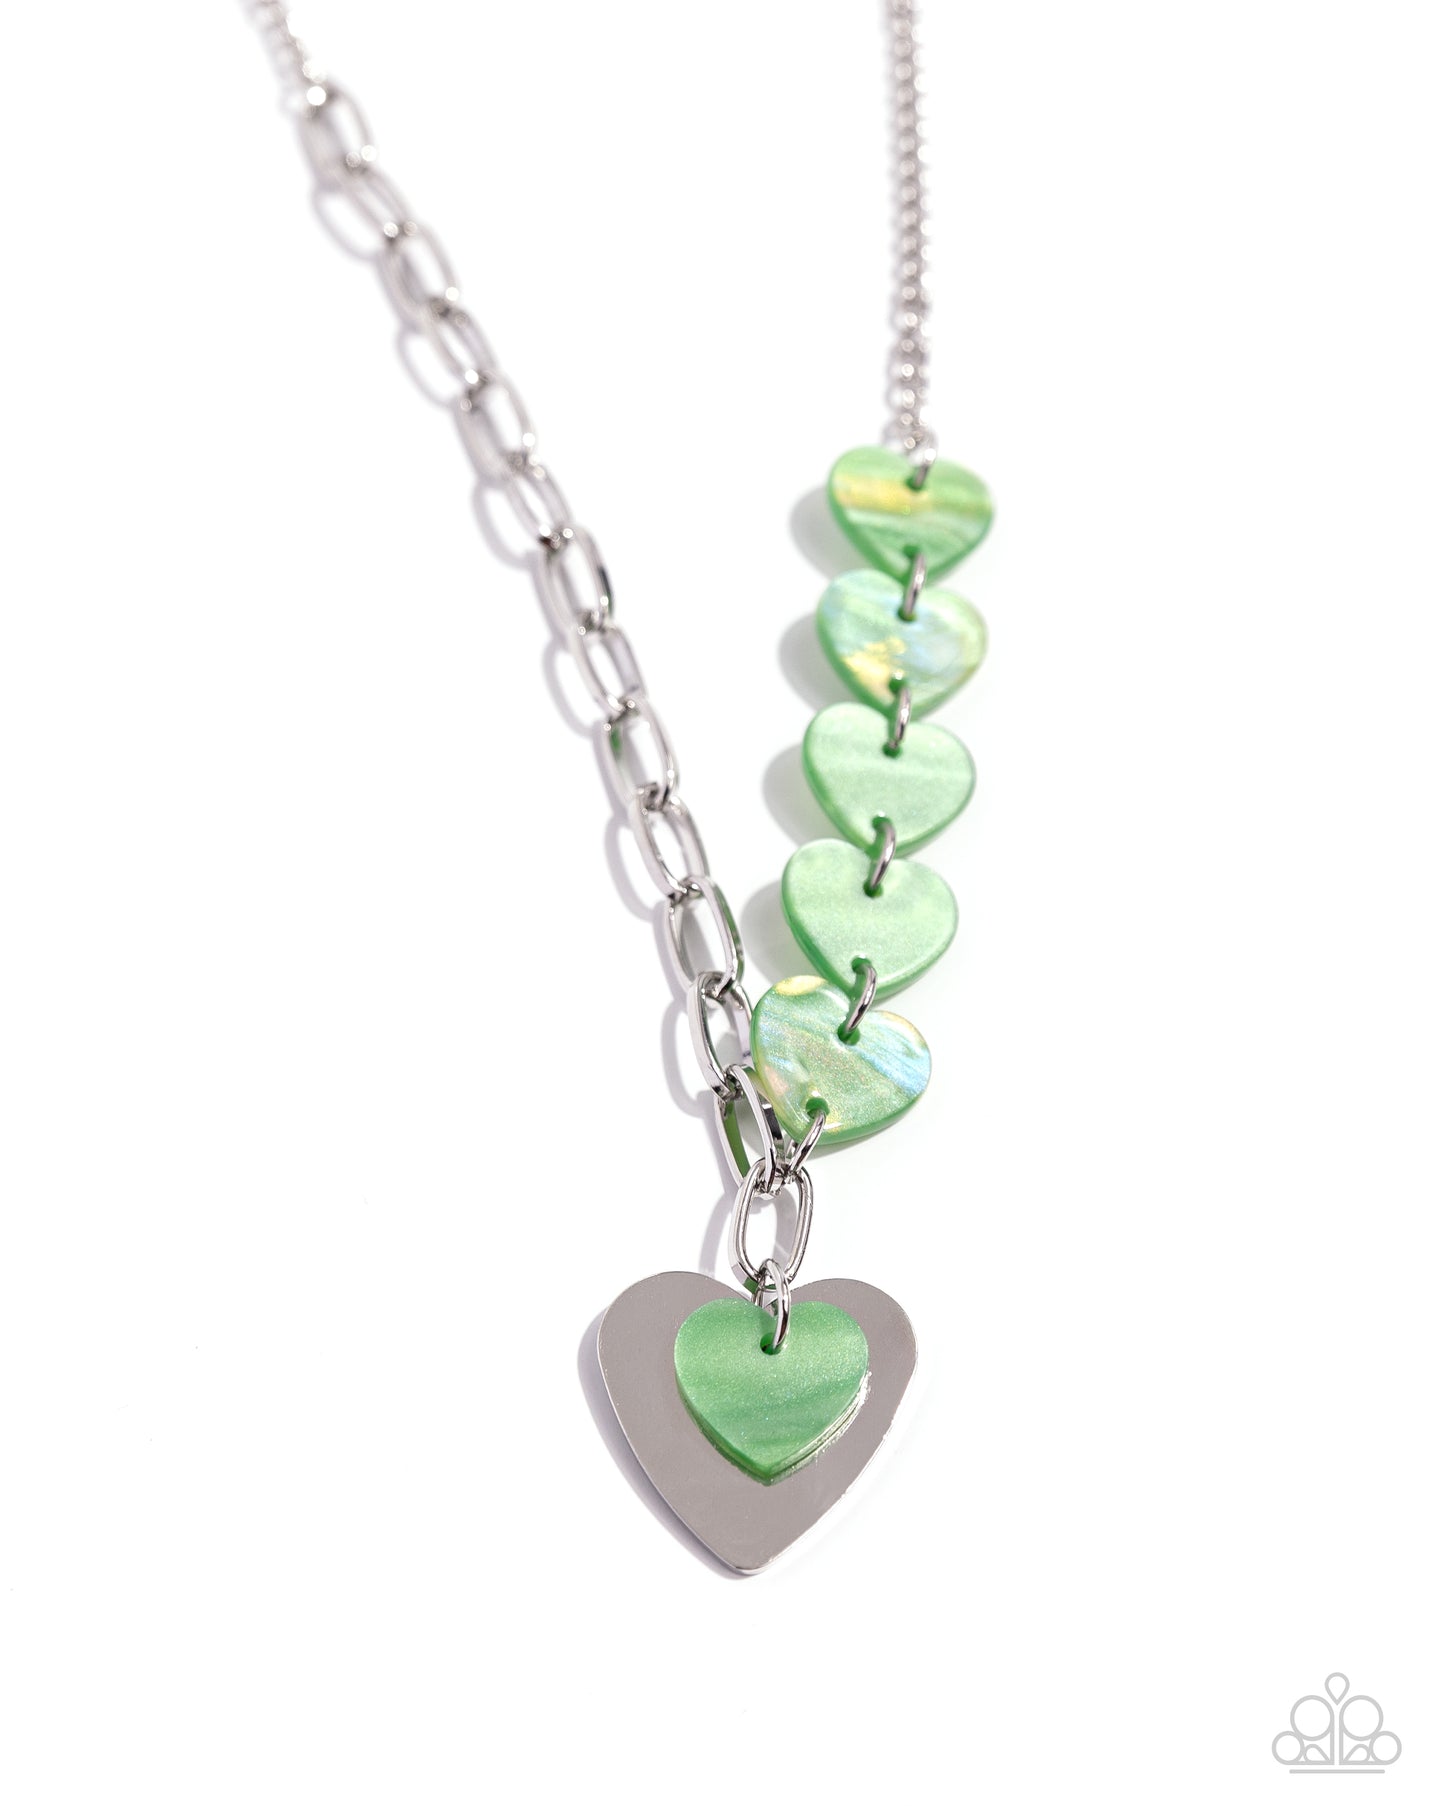 Paparazzi Accessories - Heart of the Movement - Green Necklaces a strand of opalescent green hearts collides with a single strand of paperclip chain to create an abstract blend of grit and color. A larger silver heart offsets the opalescent sheen of the green hearts that lay above it, perfectly balancing the contrasting design. Features an adjustable clasp closure.</p> <p data-mce-fragment="1"><i data-mce-fragment="1">Sold as one individual necklace. Includes one pair of matching earrings.